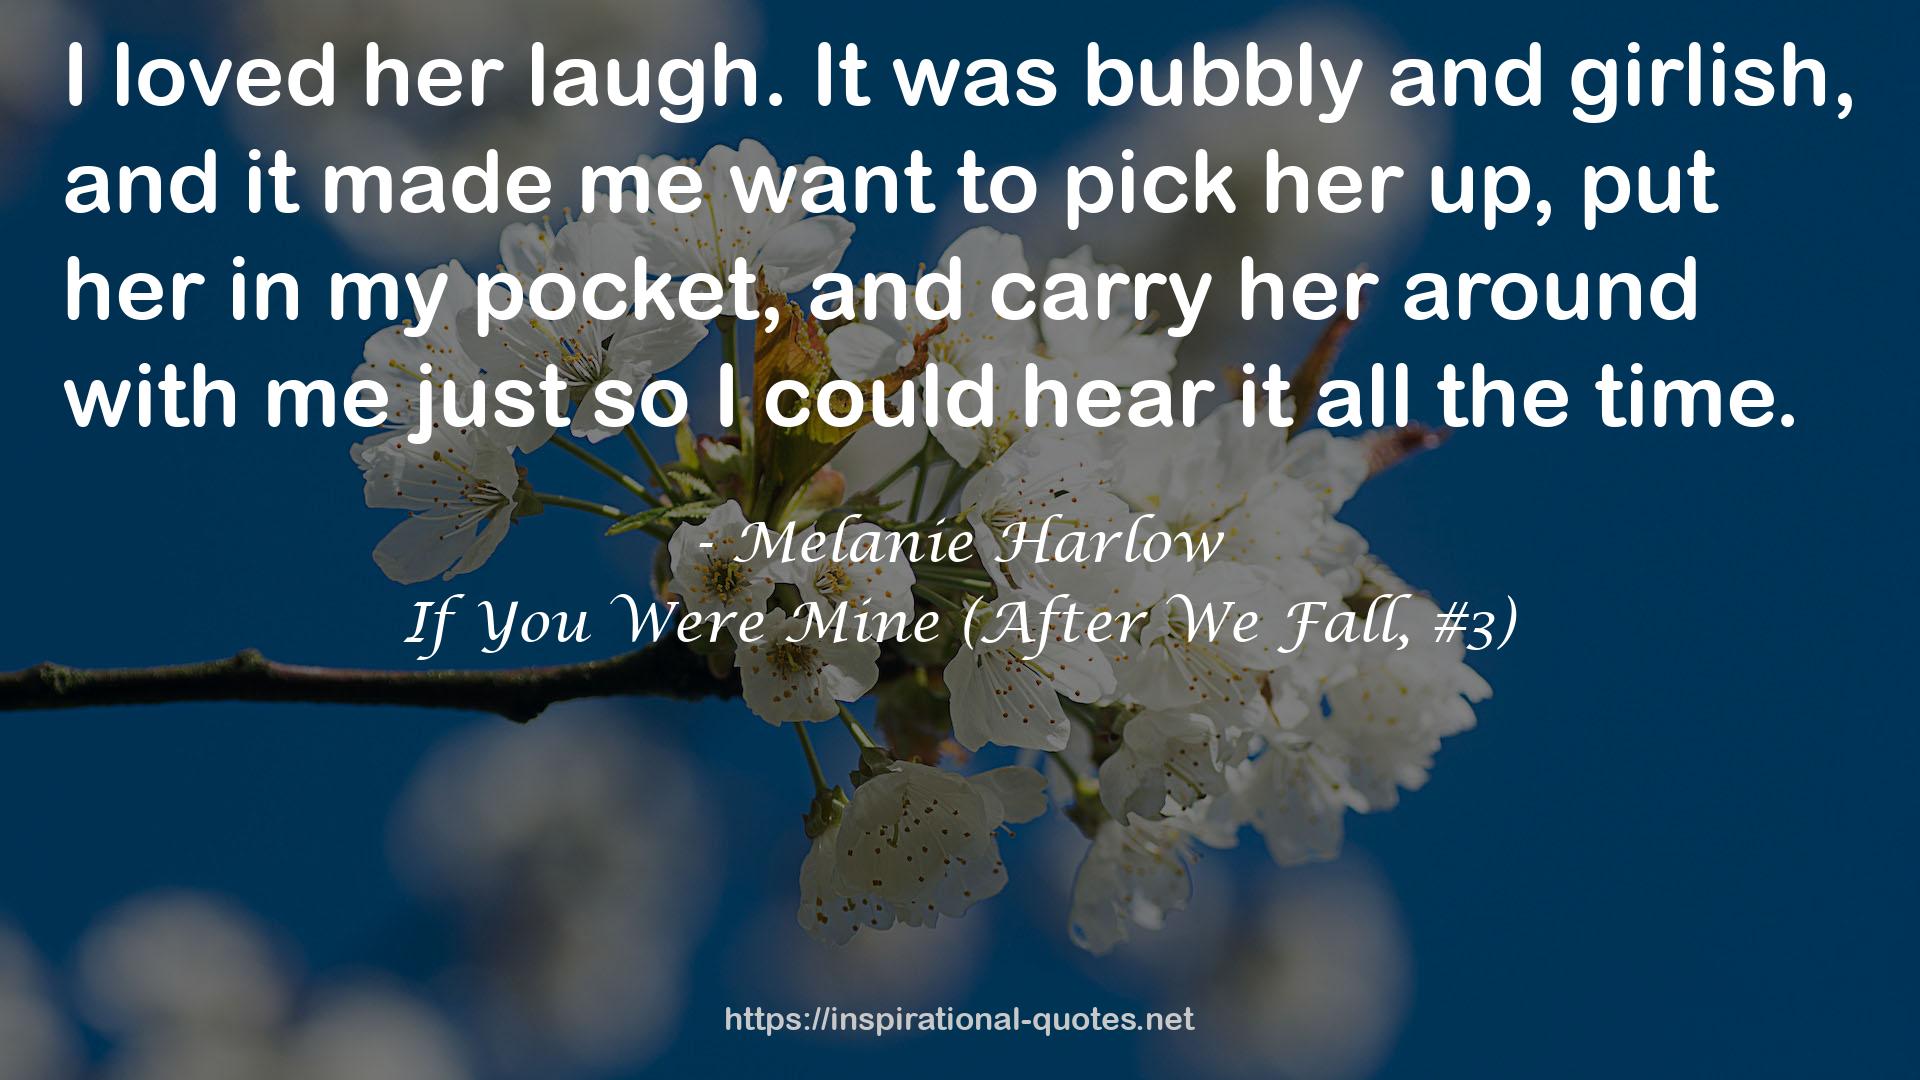 If You Were Mine (After We Fall, #3) QUOTES